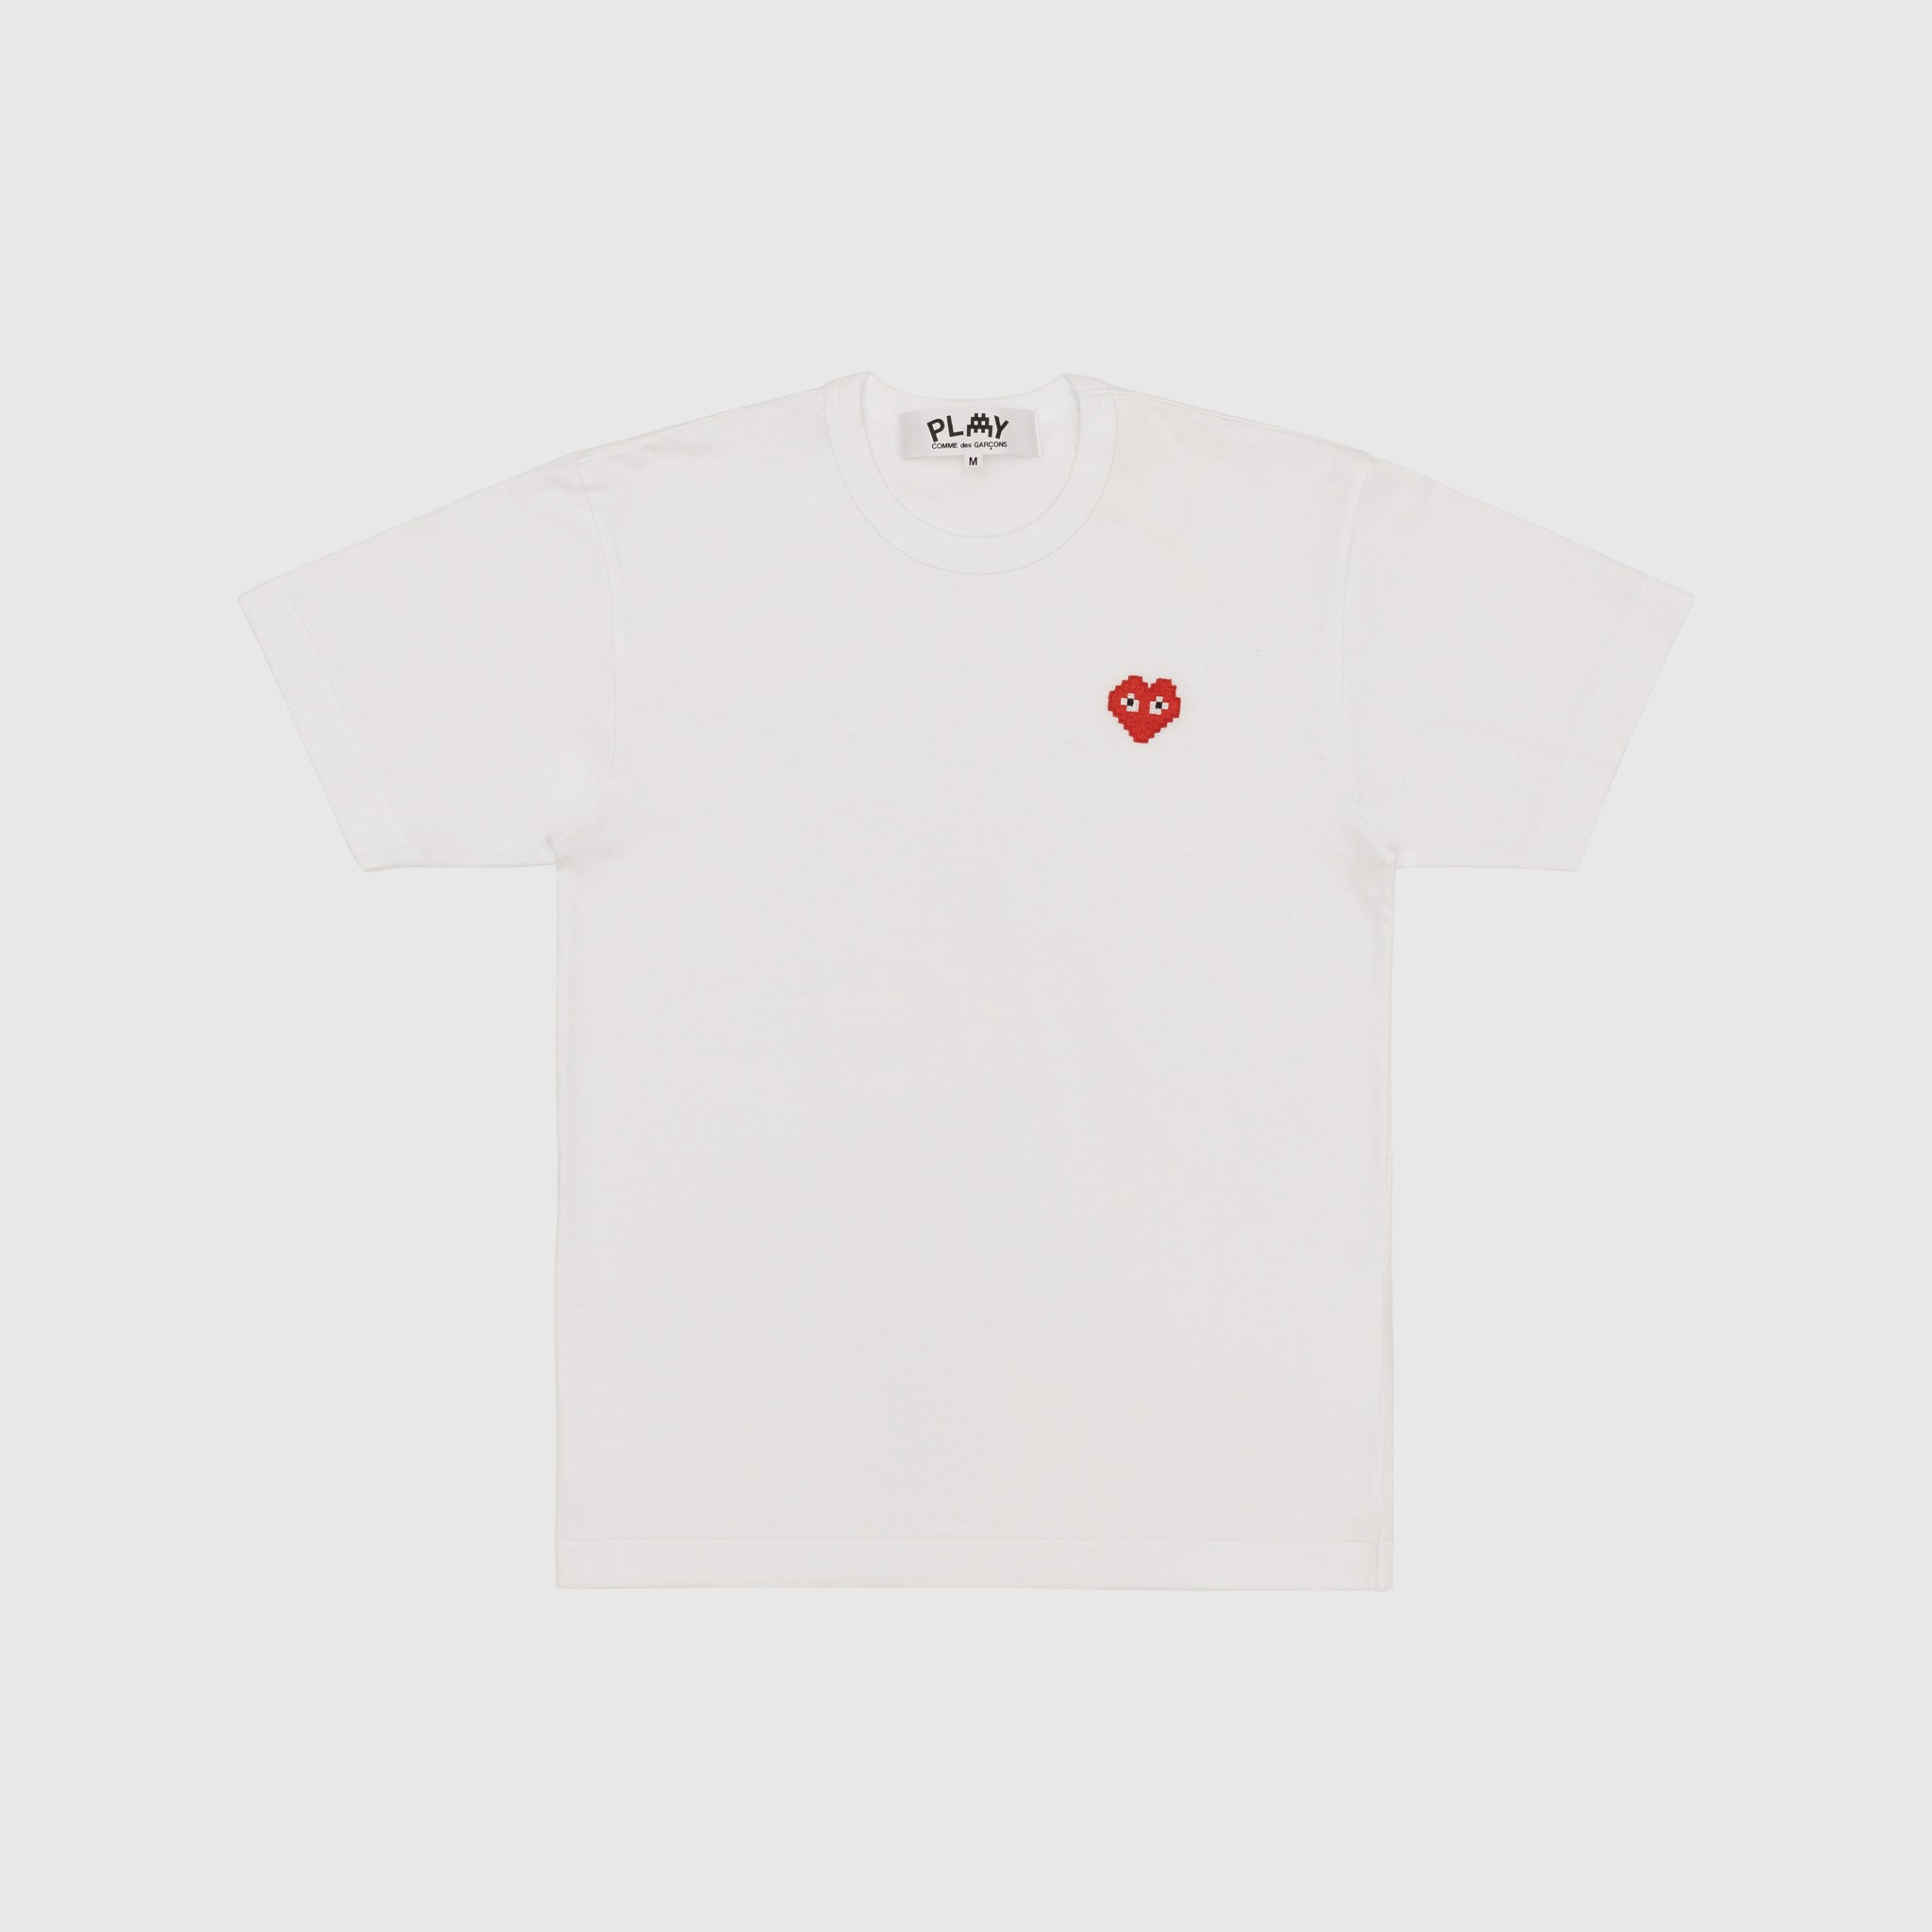 PIXELATED RED HEART S/S T-SHIRT X INVADER